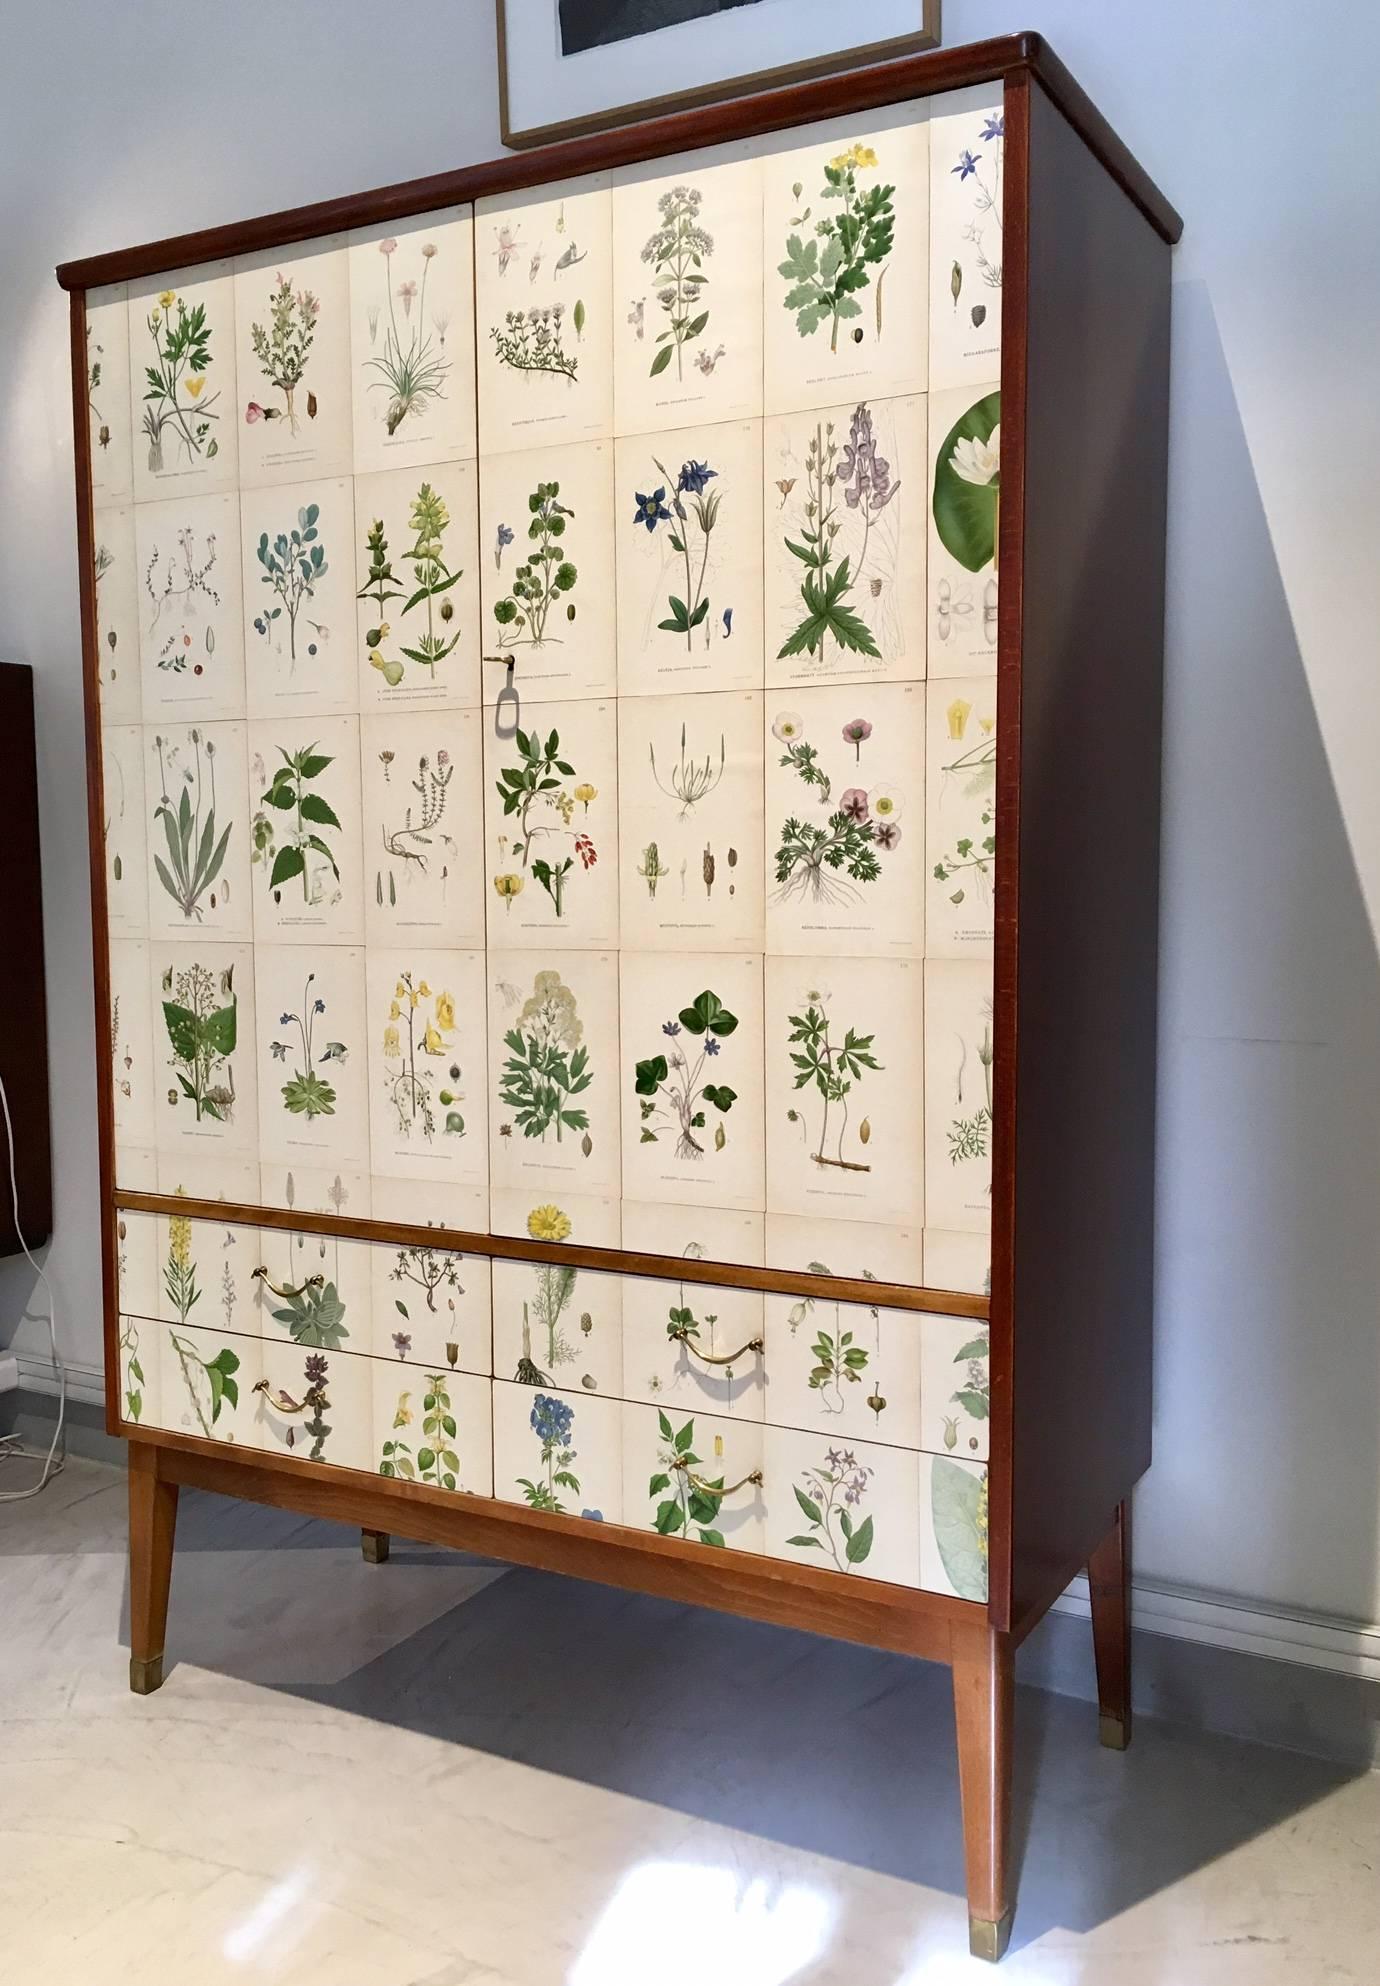 Scandinavian Modern Tall Wooden Cabinet with Nordens Flora Illustrations by C.A. Lindman